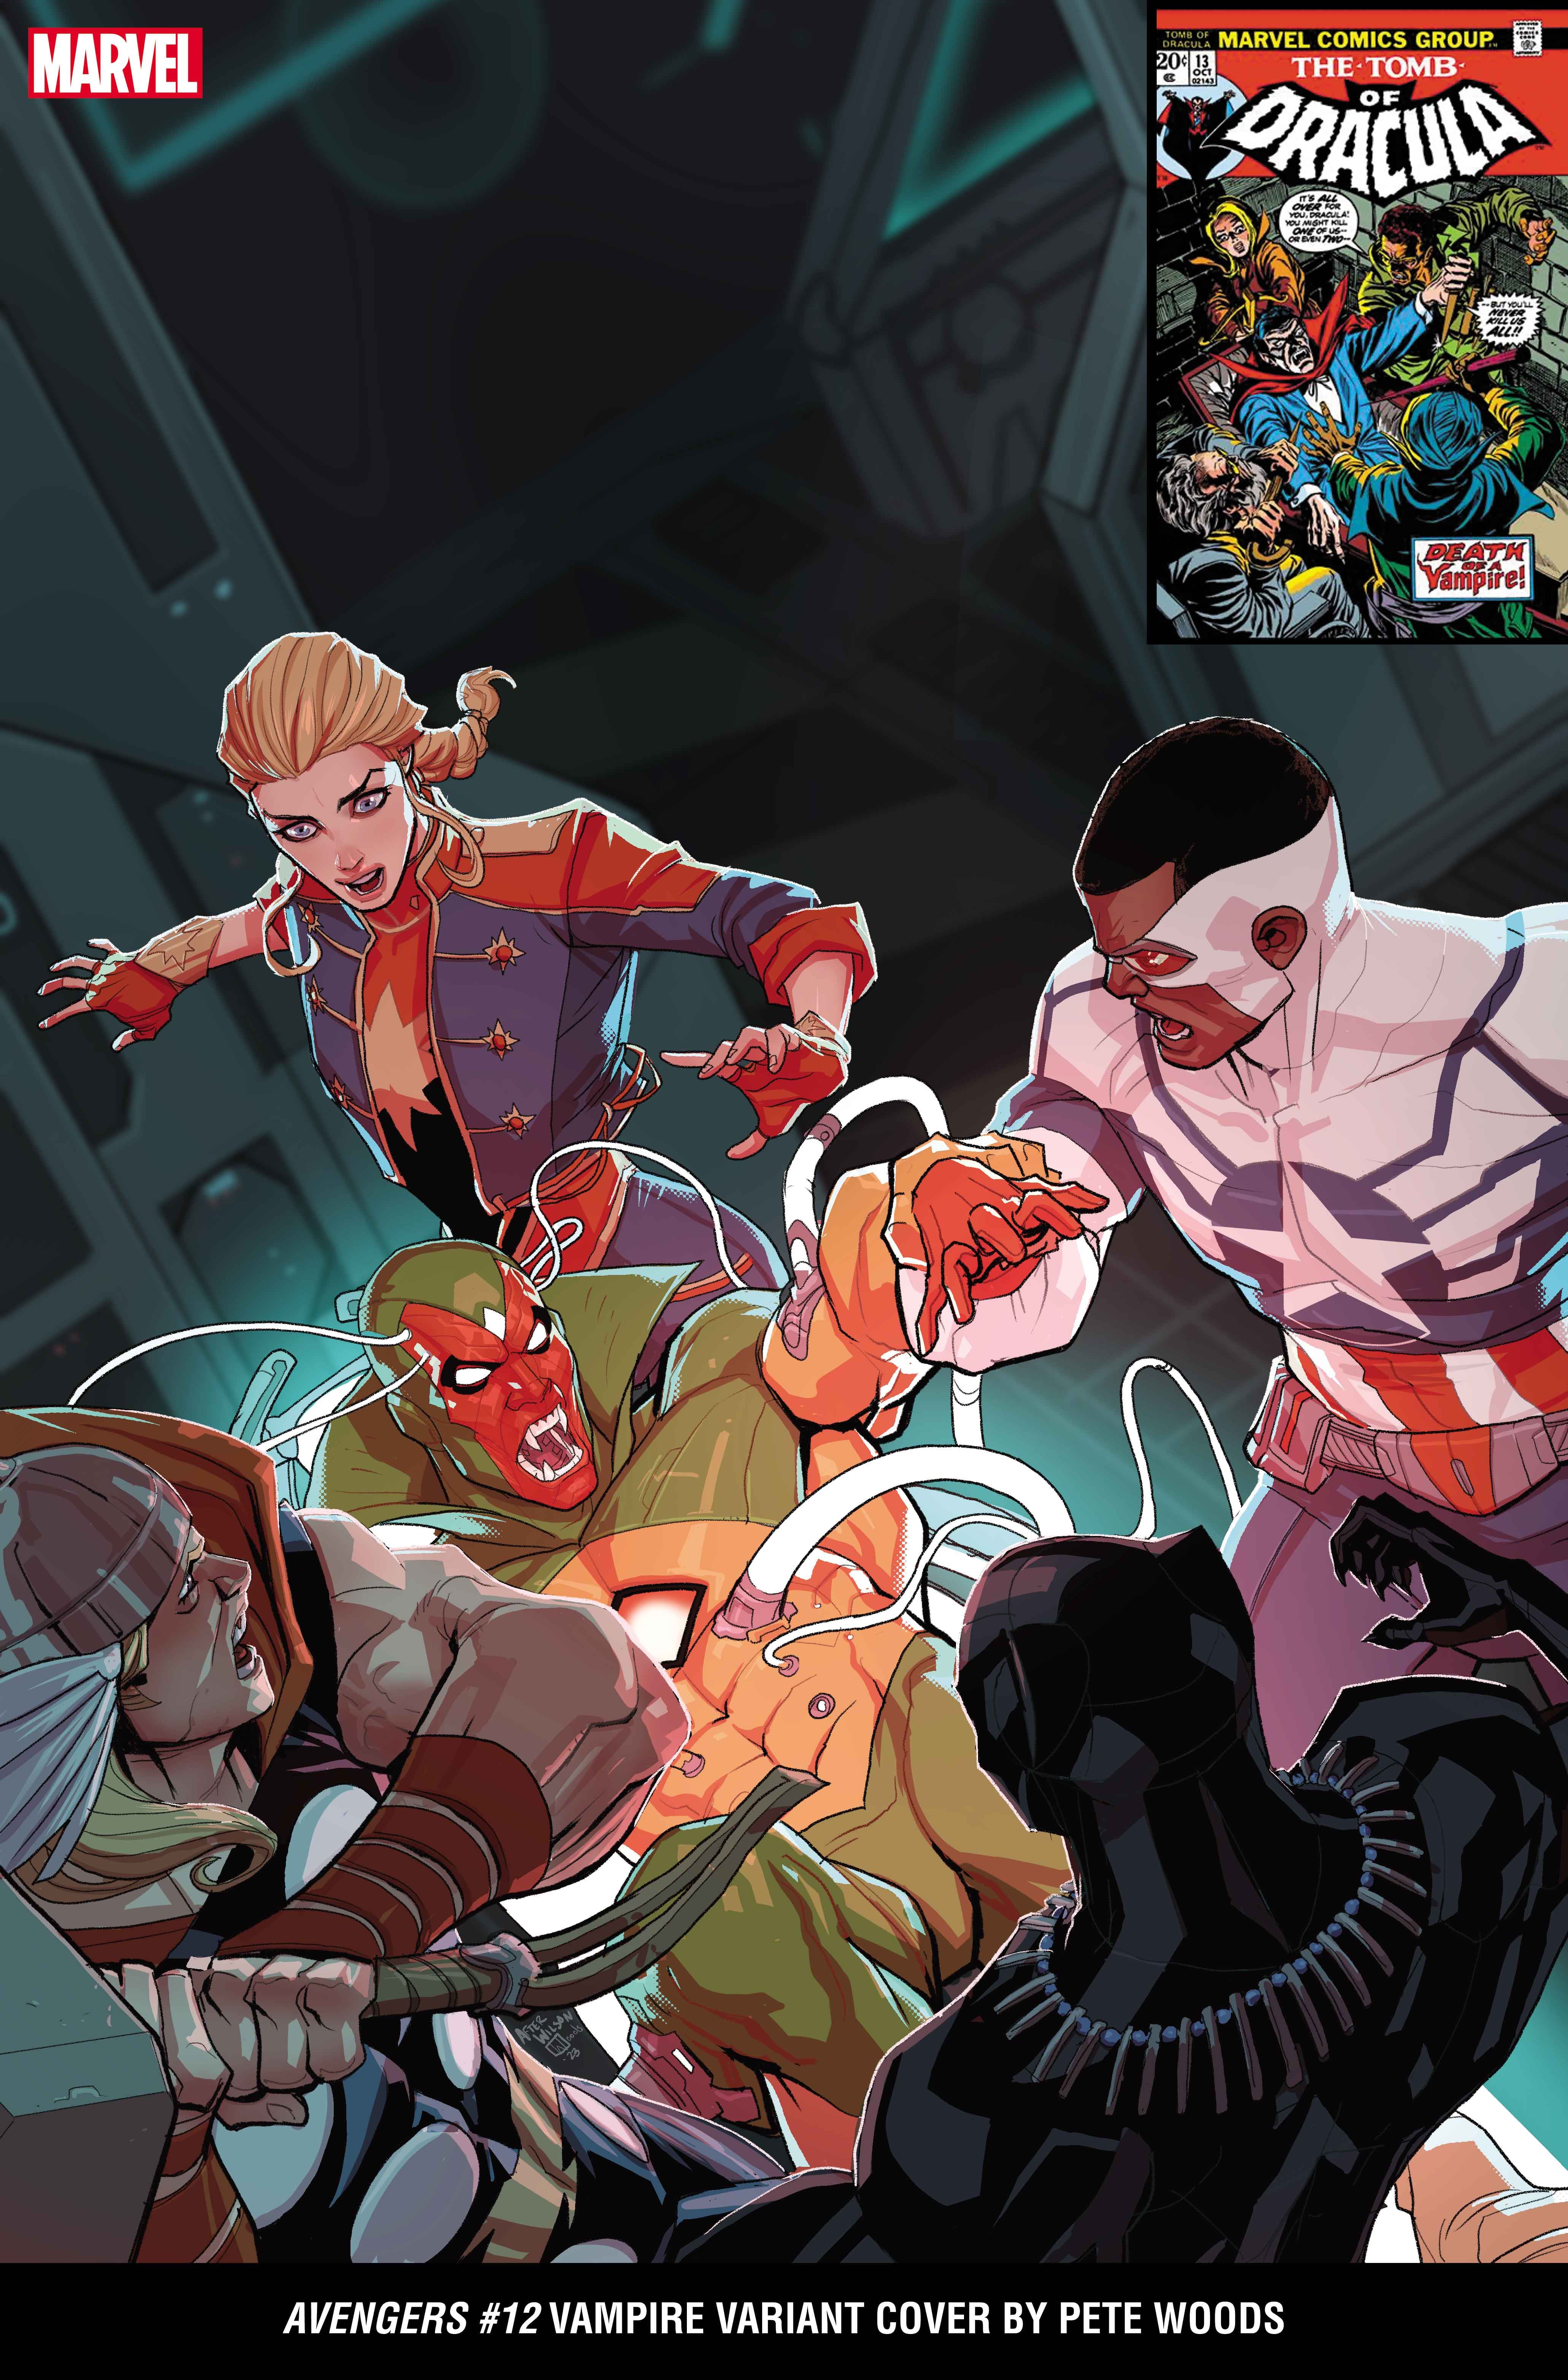 Marvel's Spidey and his Amazing Friends': Mayhem Ensues for Team Spidey